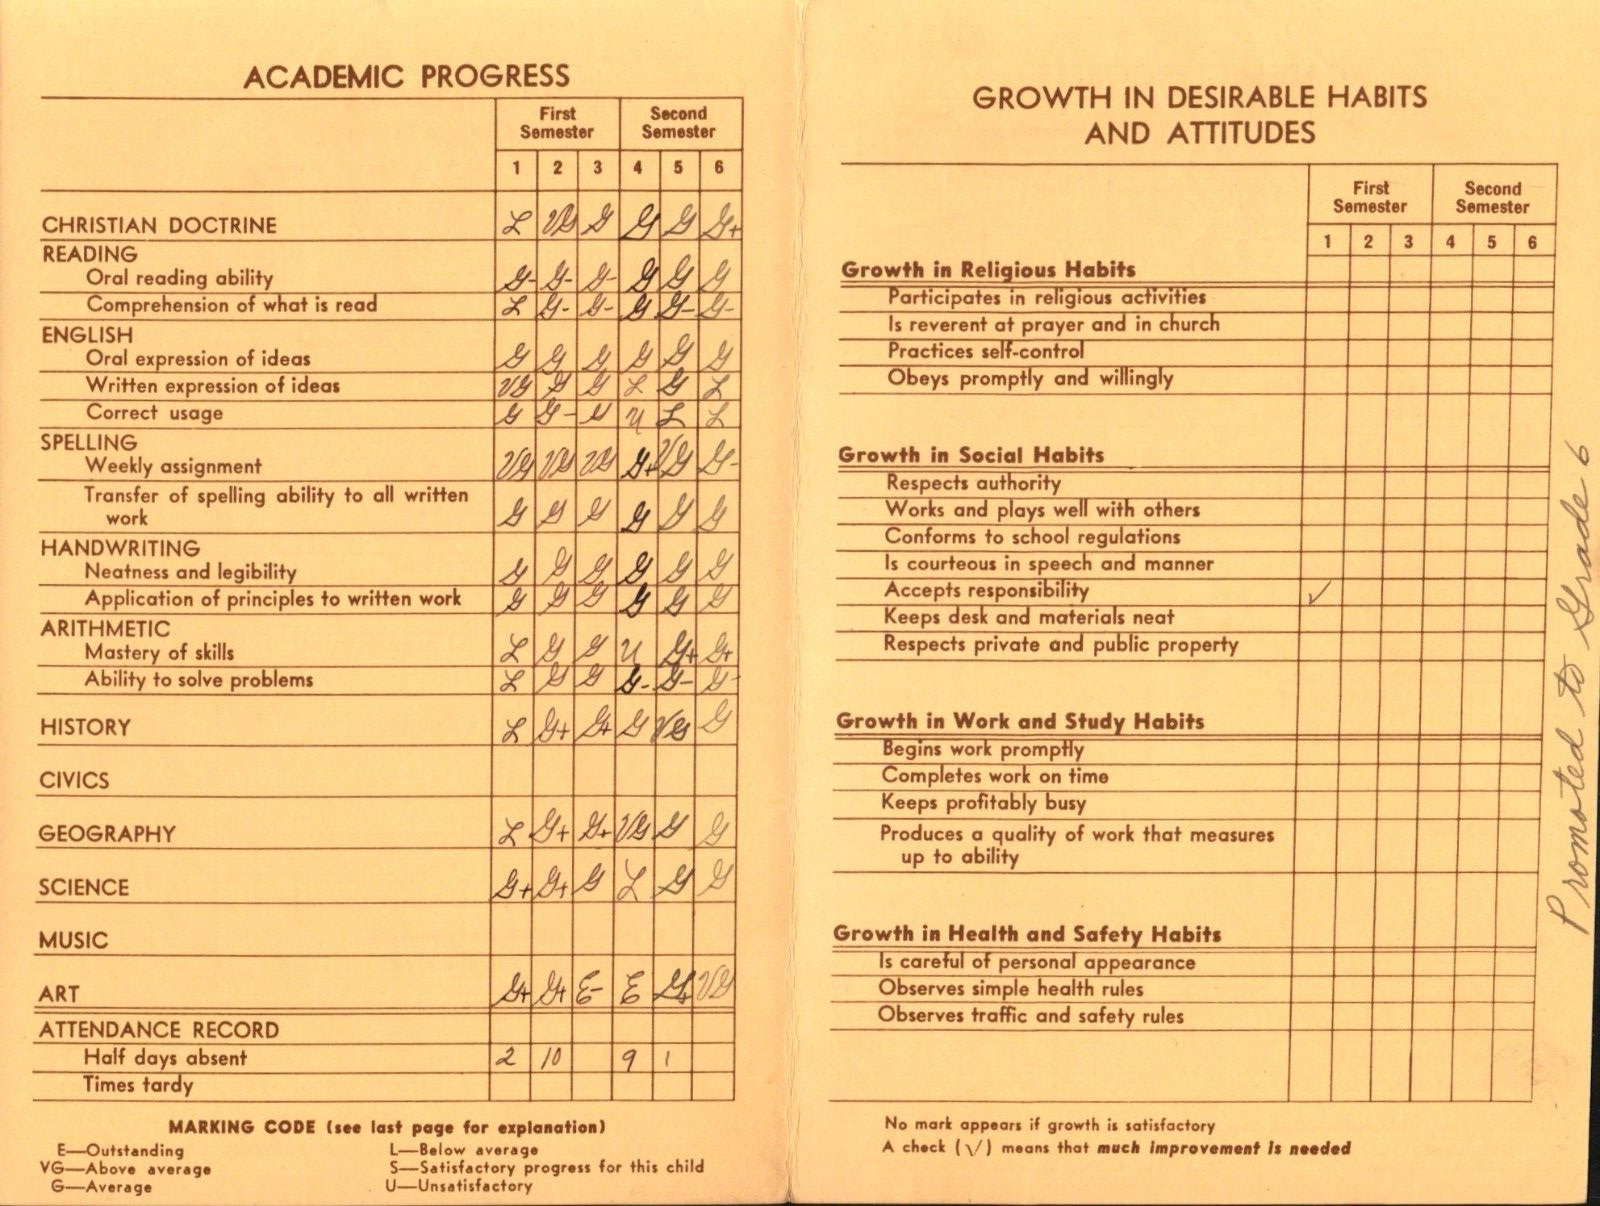 1957/58 FIFTH GRADE REPORT CARD - ST.JOHN BERCHMAN SCHOOL ARCHDIOCESE OF CHICAGO